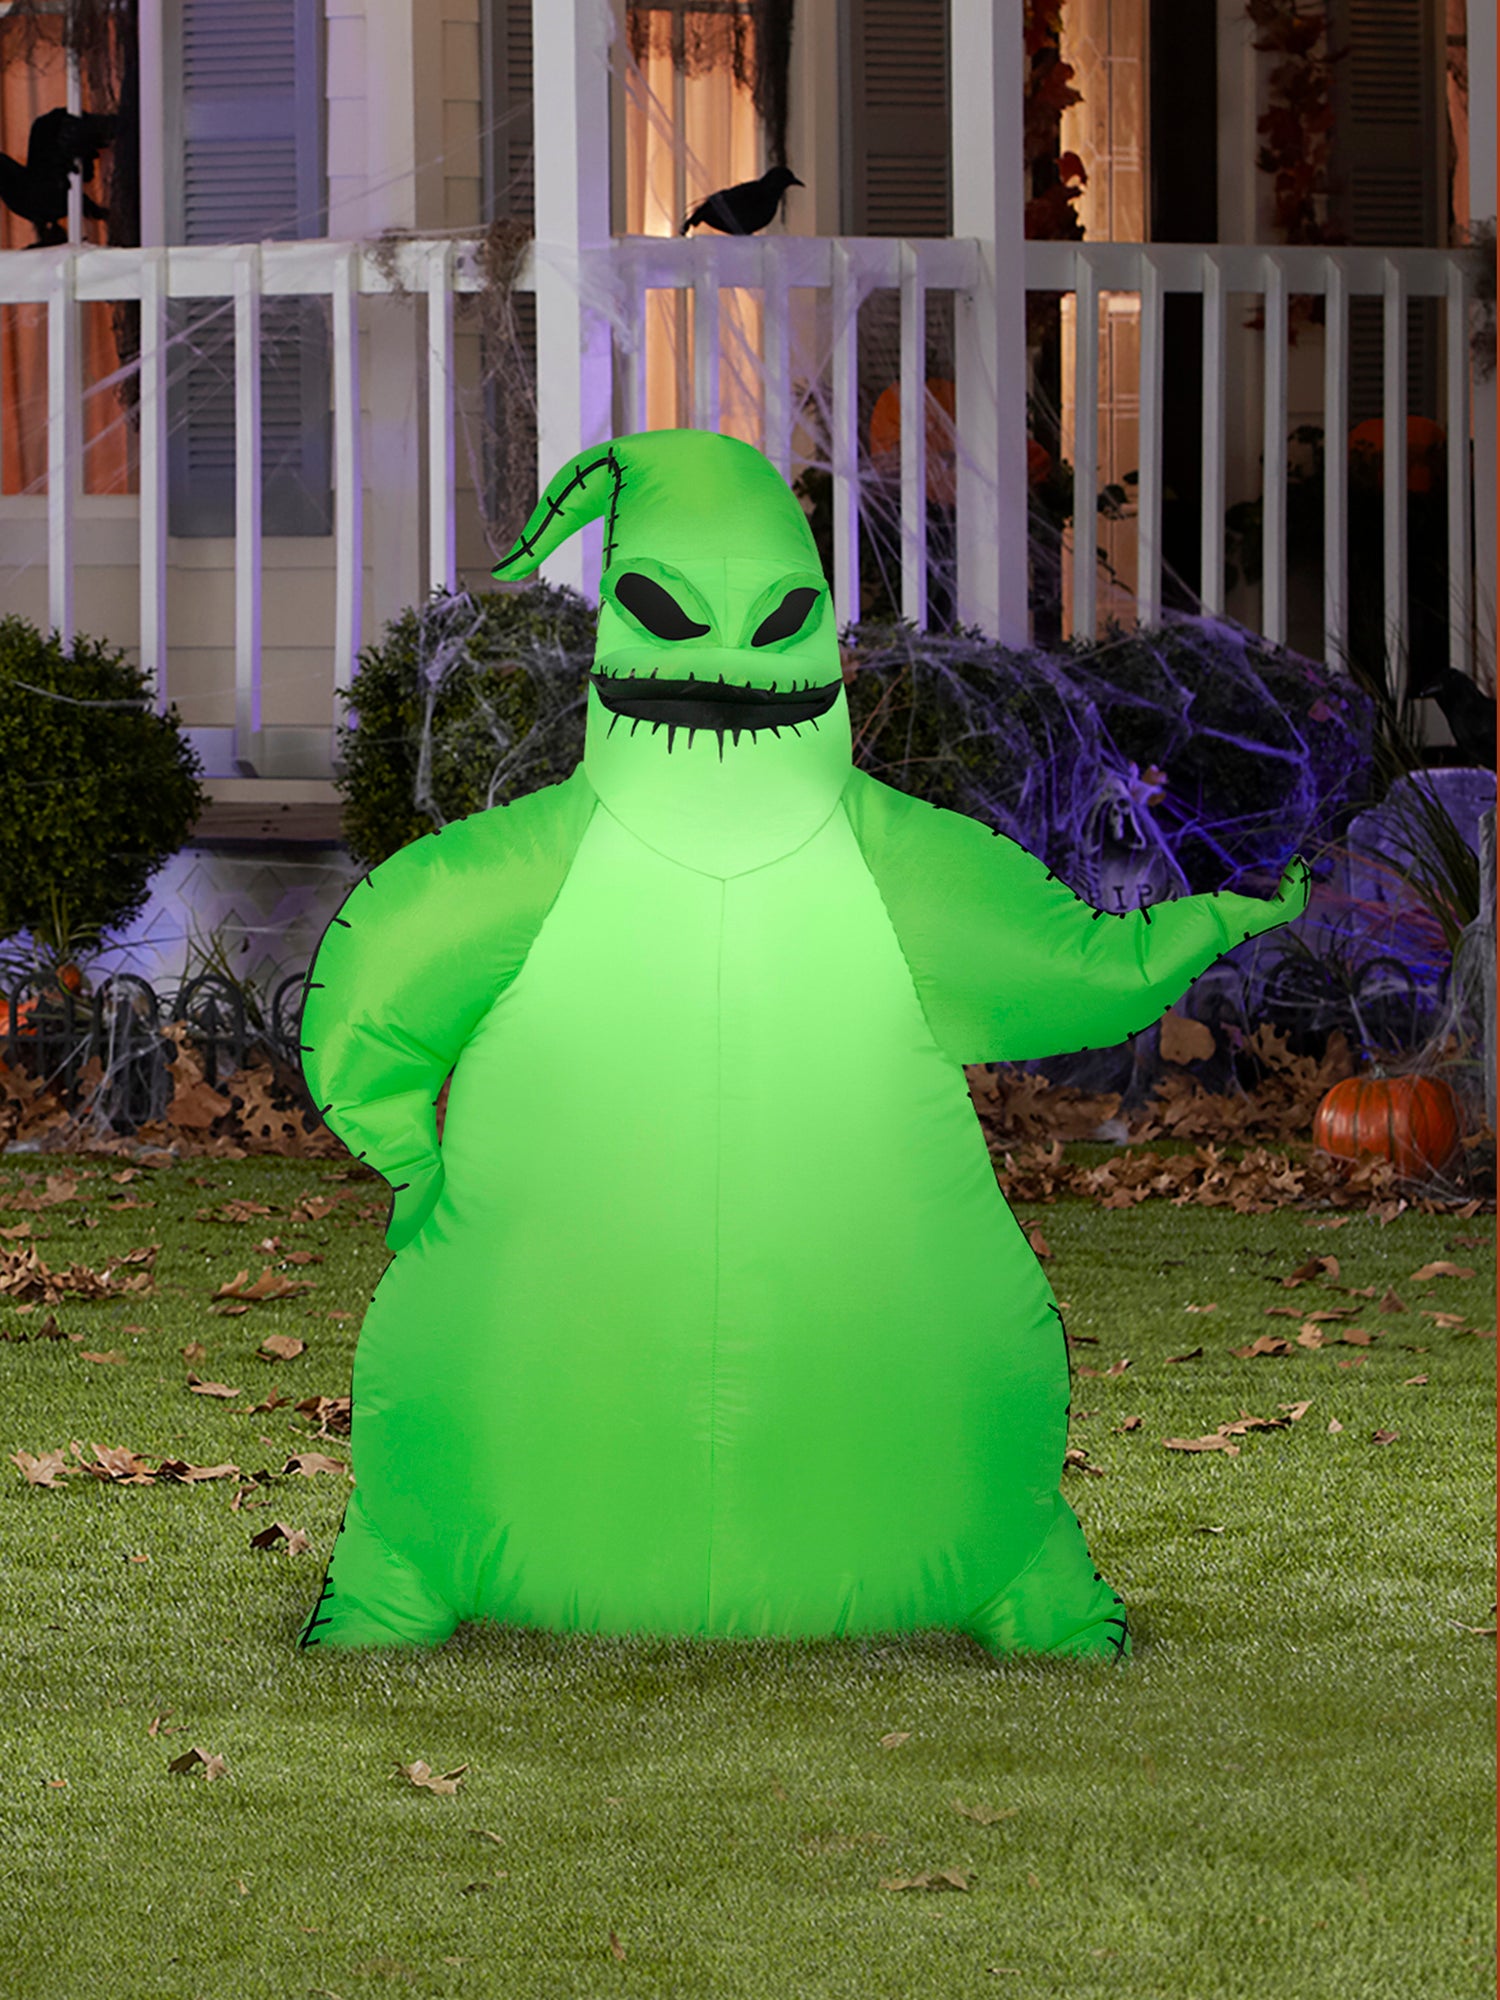 3.5 Foot The Nightmare Before Christmas Green Oogie Boogie Light Up Halloween Inflatable Lawn Decor - costumes.com